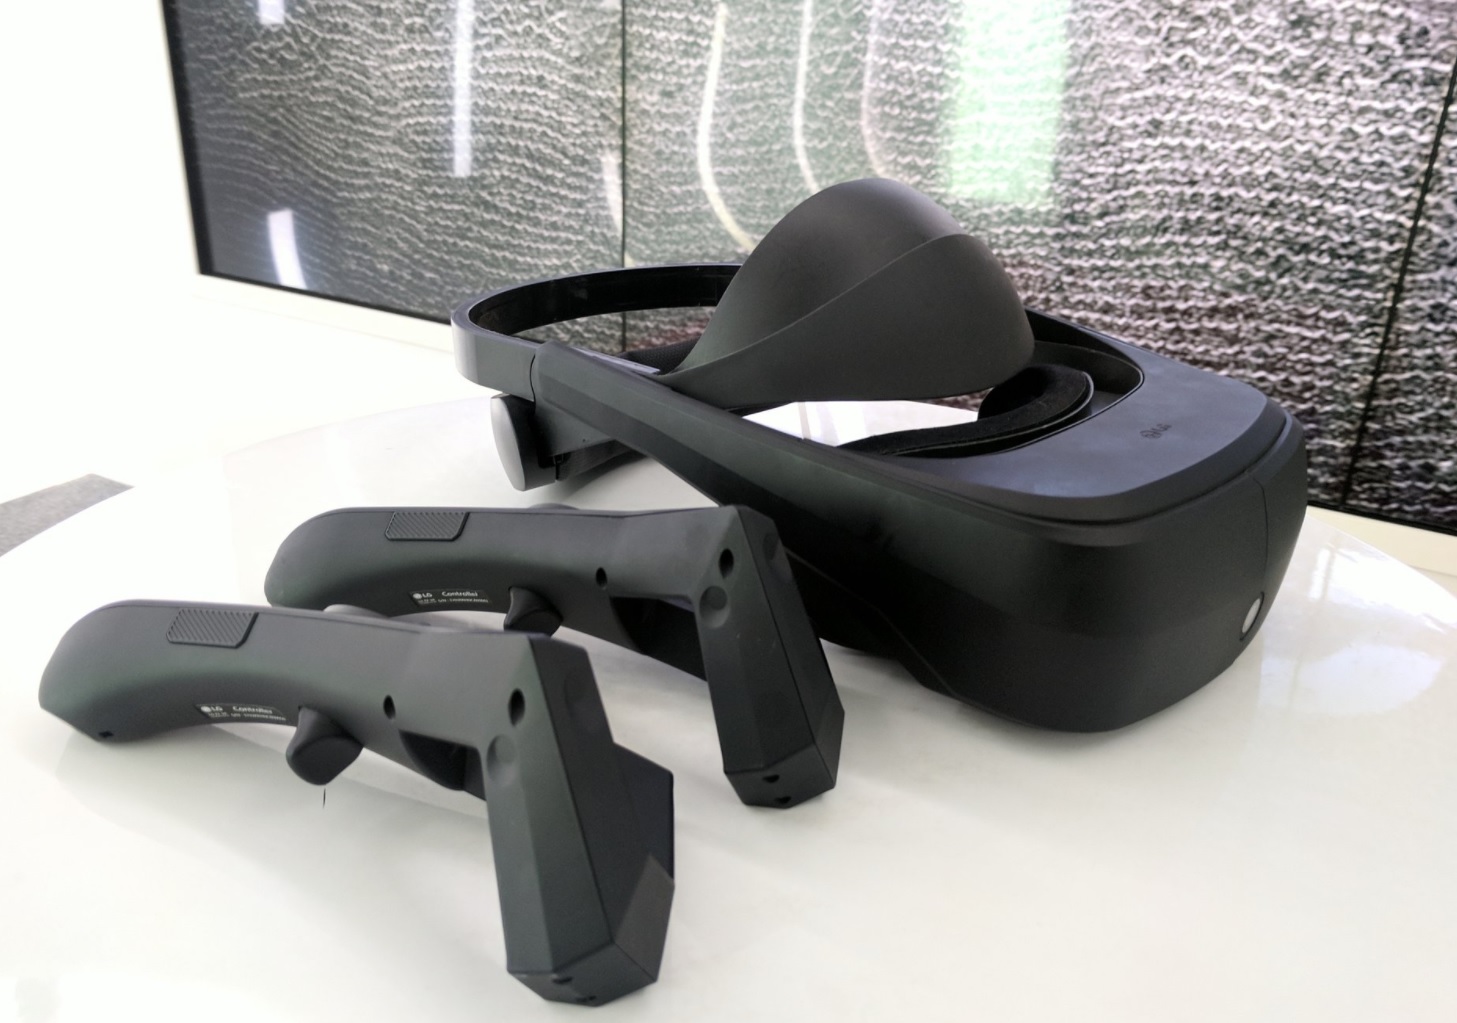 vr headsets that work with steam